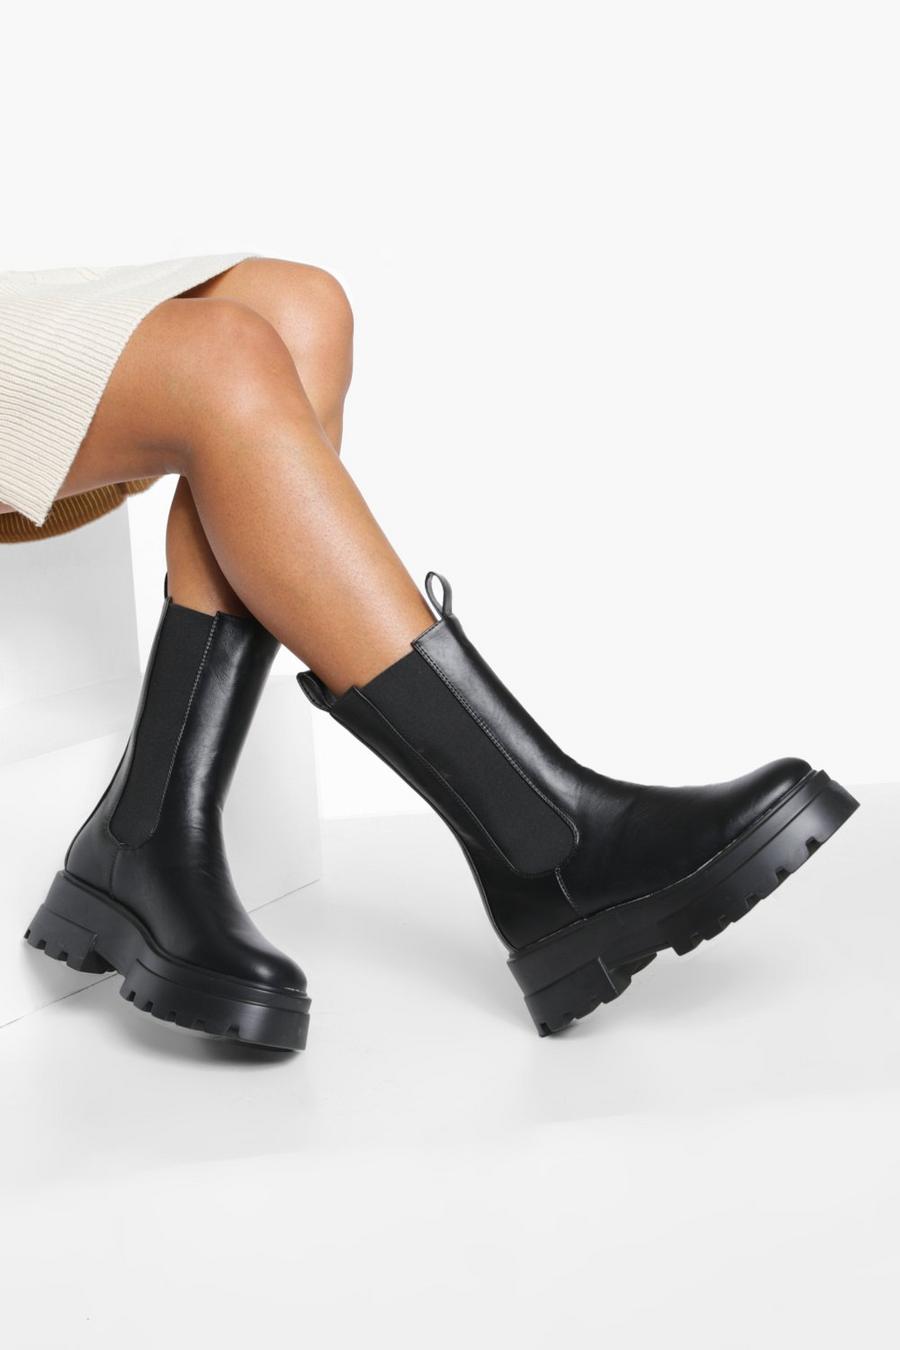 Black noir Wide Fit Cleated Sole Calf High Chelsea Boots